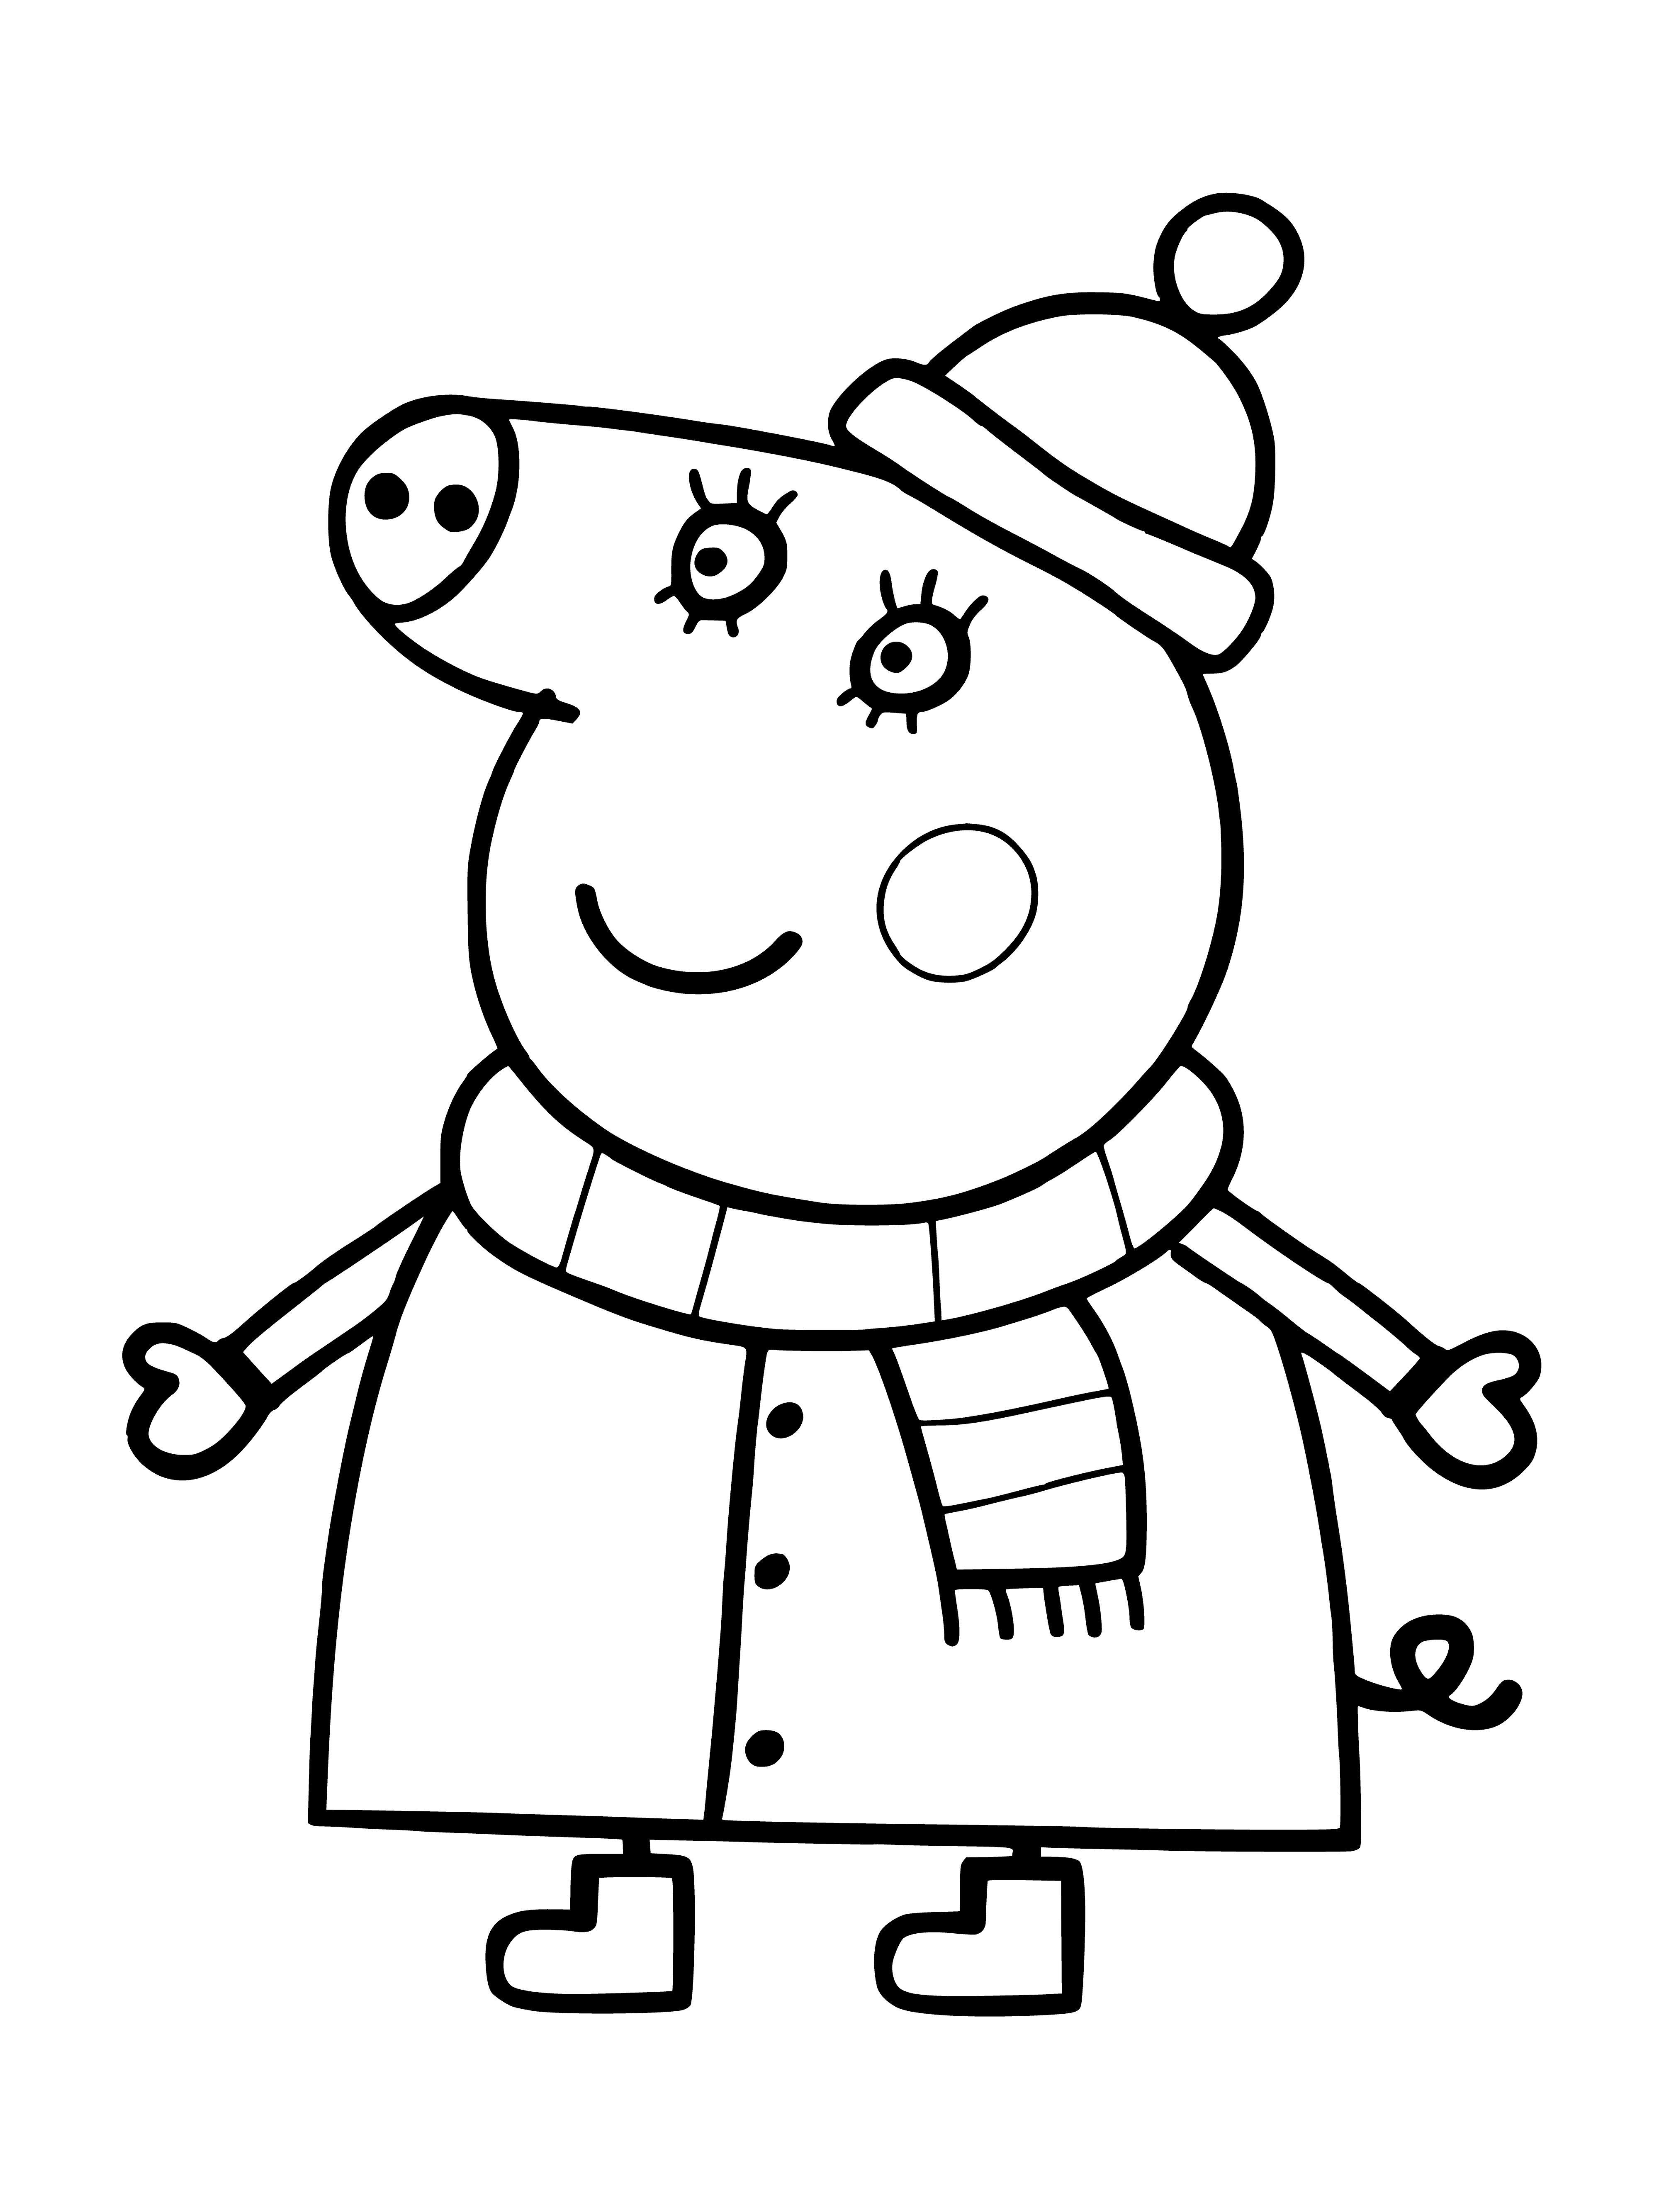 Mom Pig in winter clothes coloring page